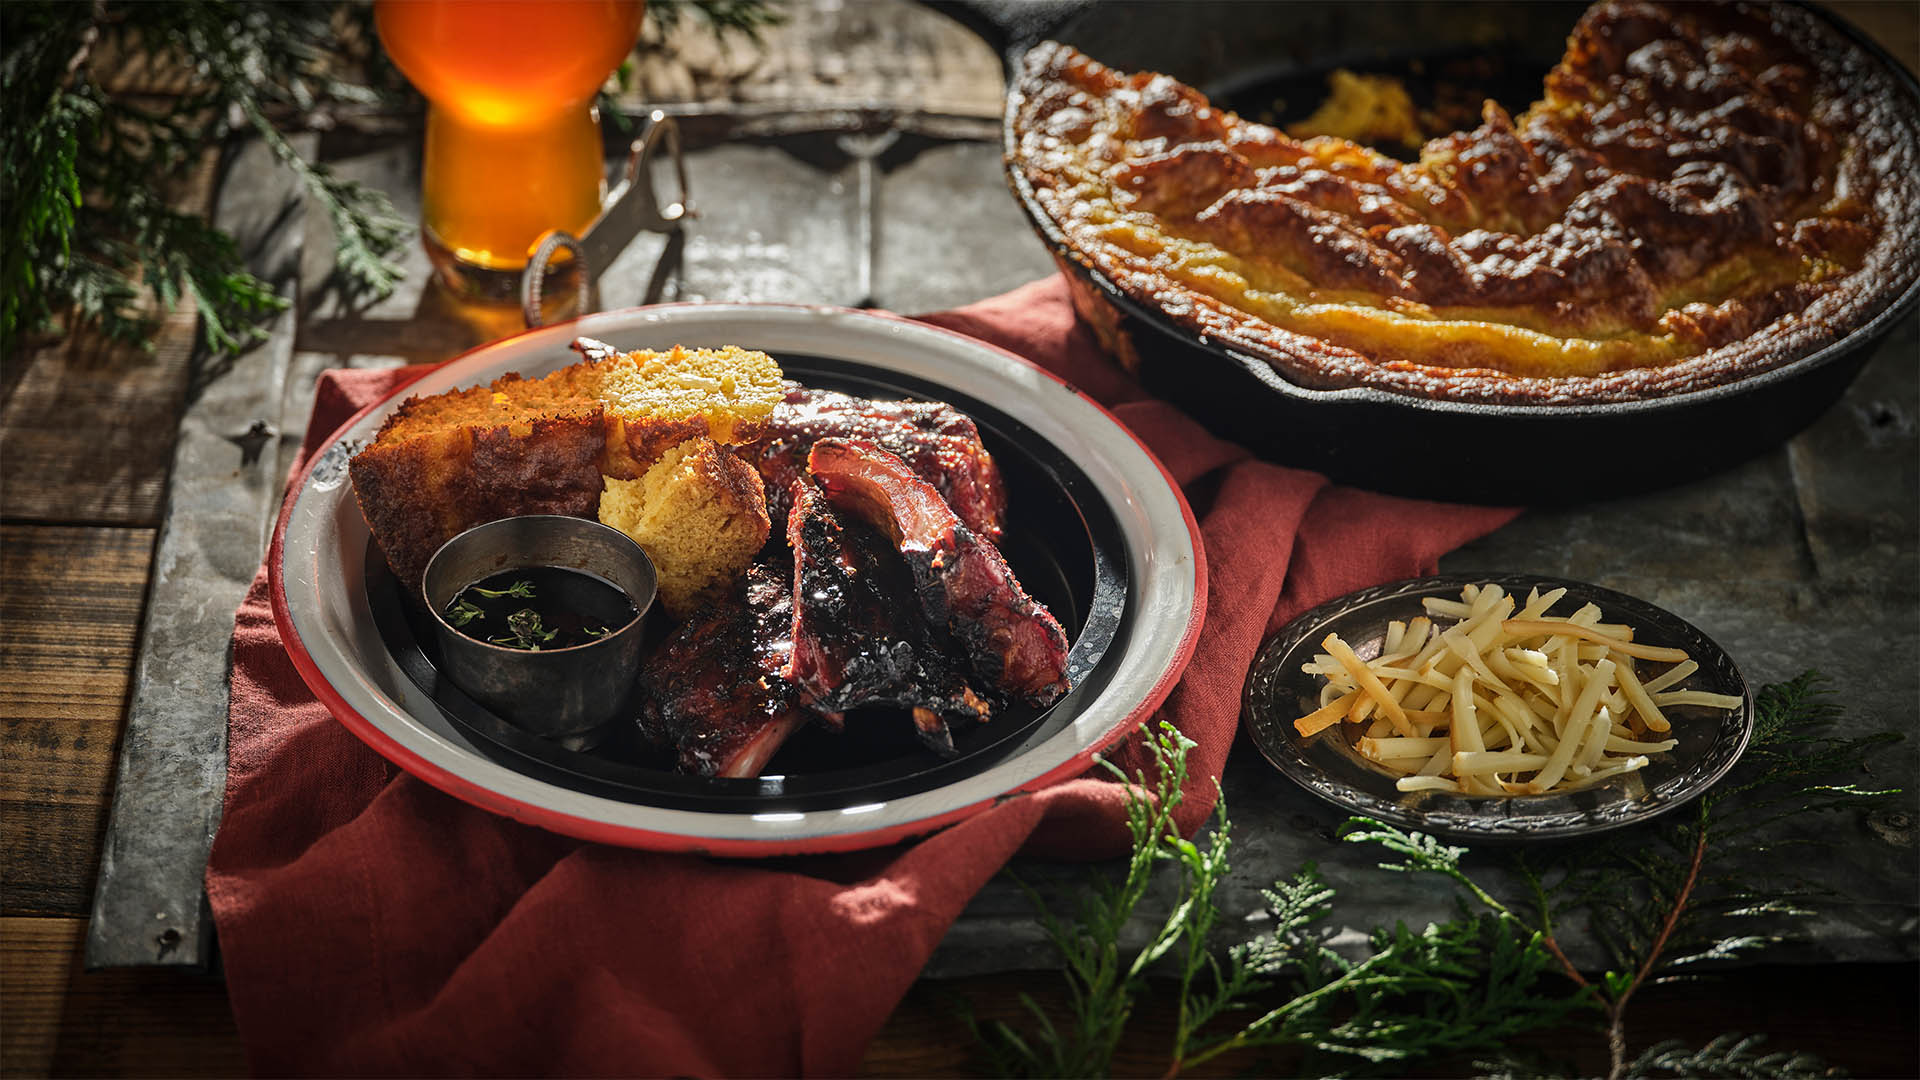 Smoked cheddar cornbread and ribs with dip on a round plate with a red rim on top of a red napkin next to a small round black plate with shredded cheese next to a cast iron pan with cornbread. 